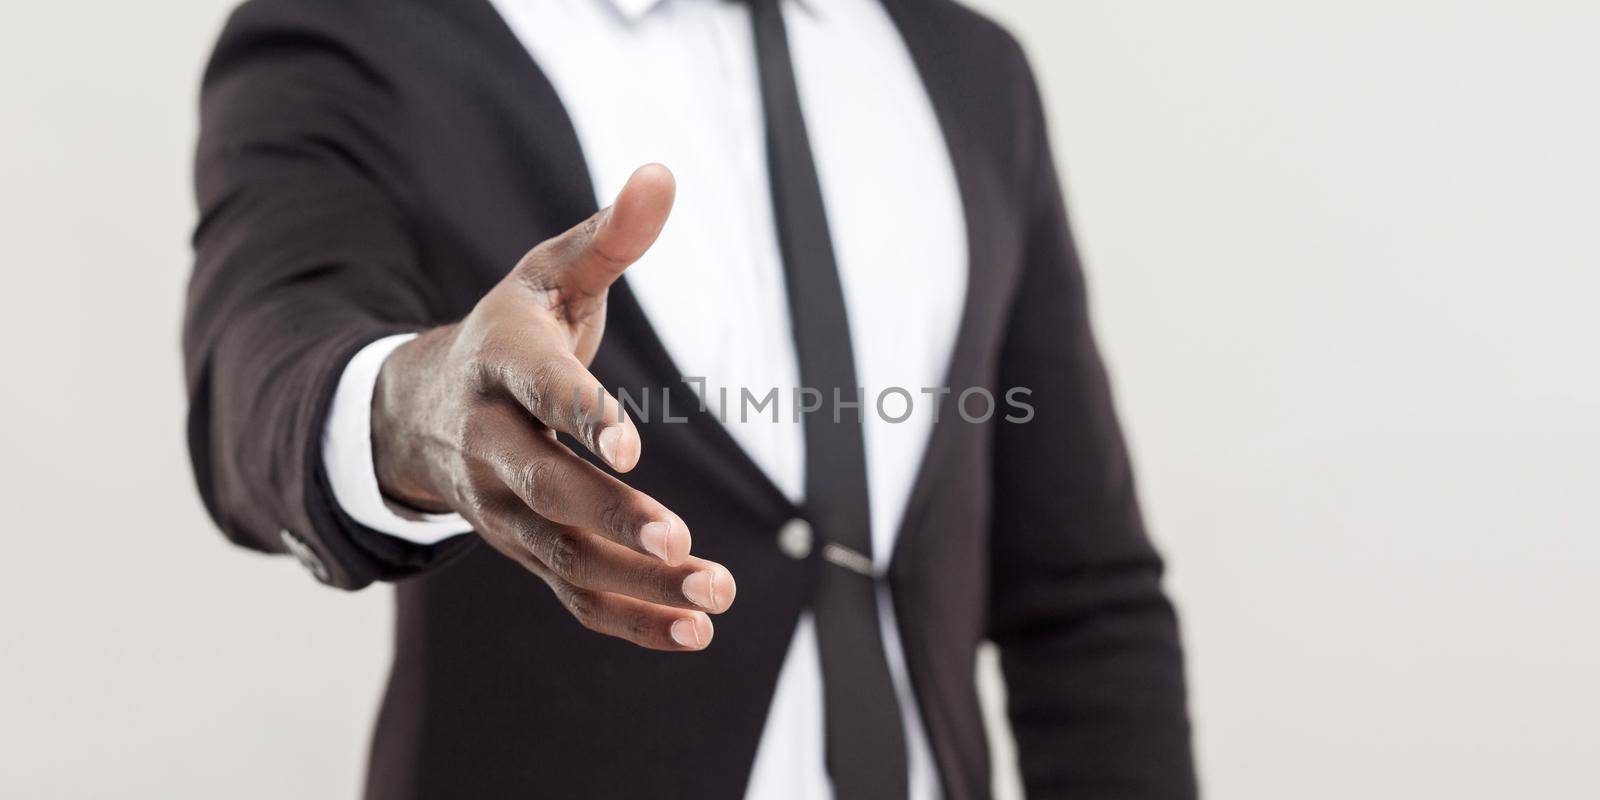 Man hand in black suit and tie giving hand to greeting or handshake at camera. focus on hand. indoor studio shot, isolated on light grey background copyspace.